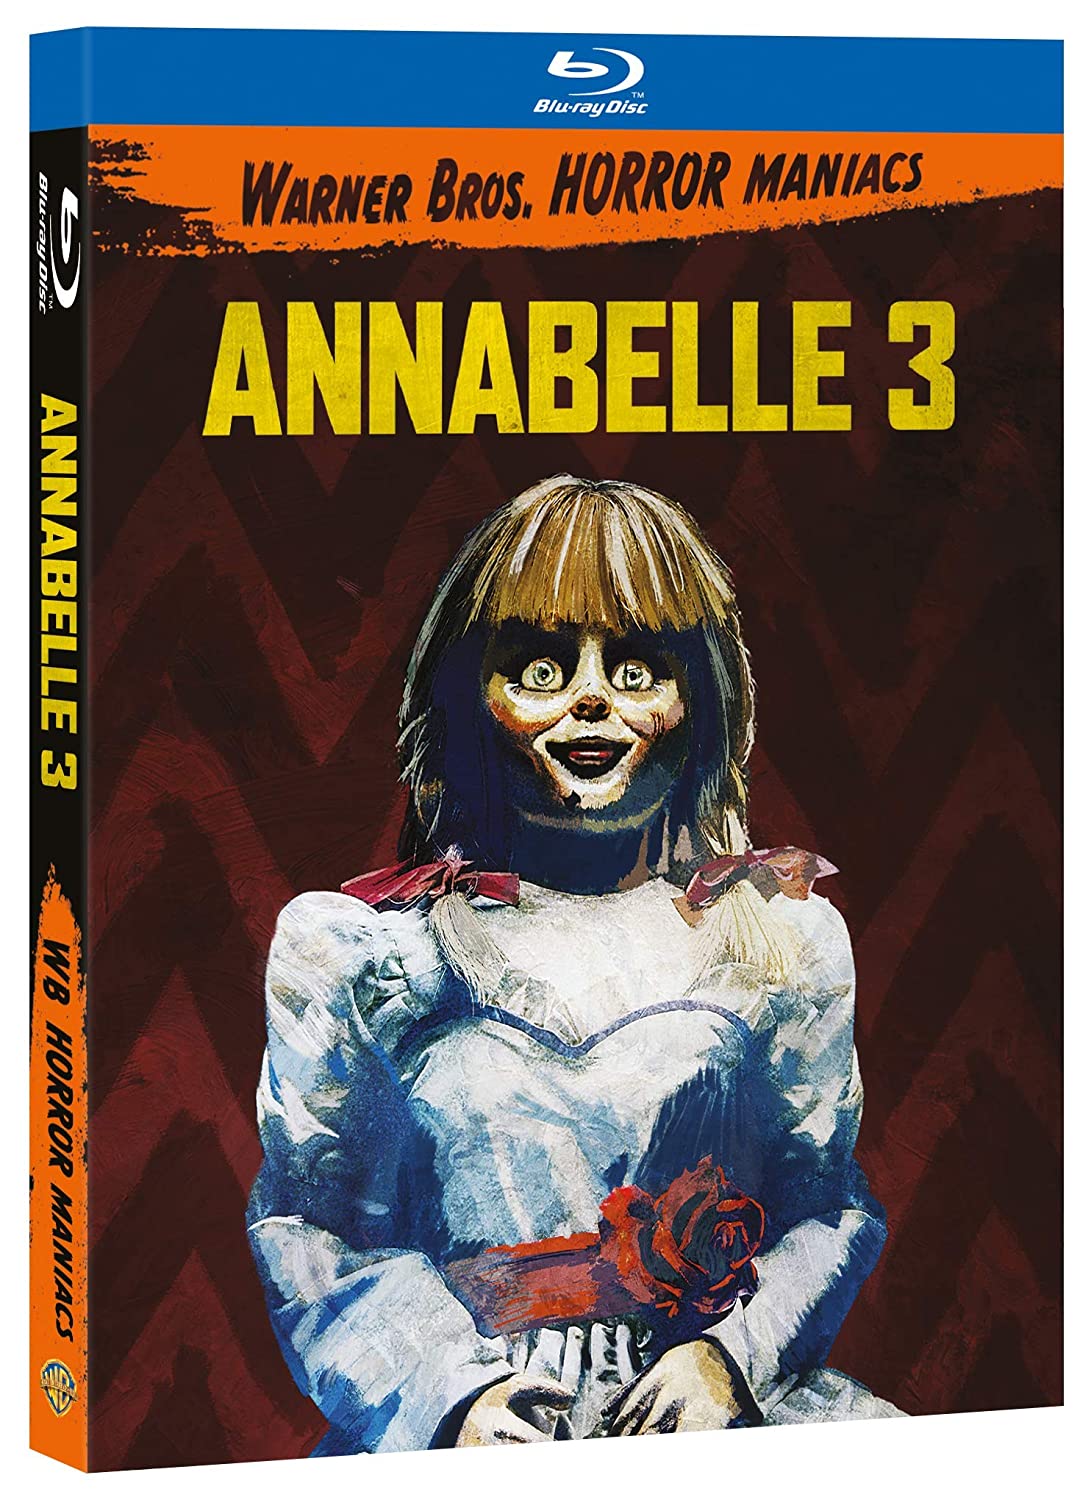 ANNABELLE 3 (HORROR MANIACS COLLECTION)